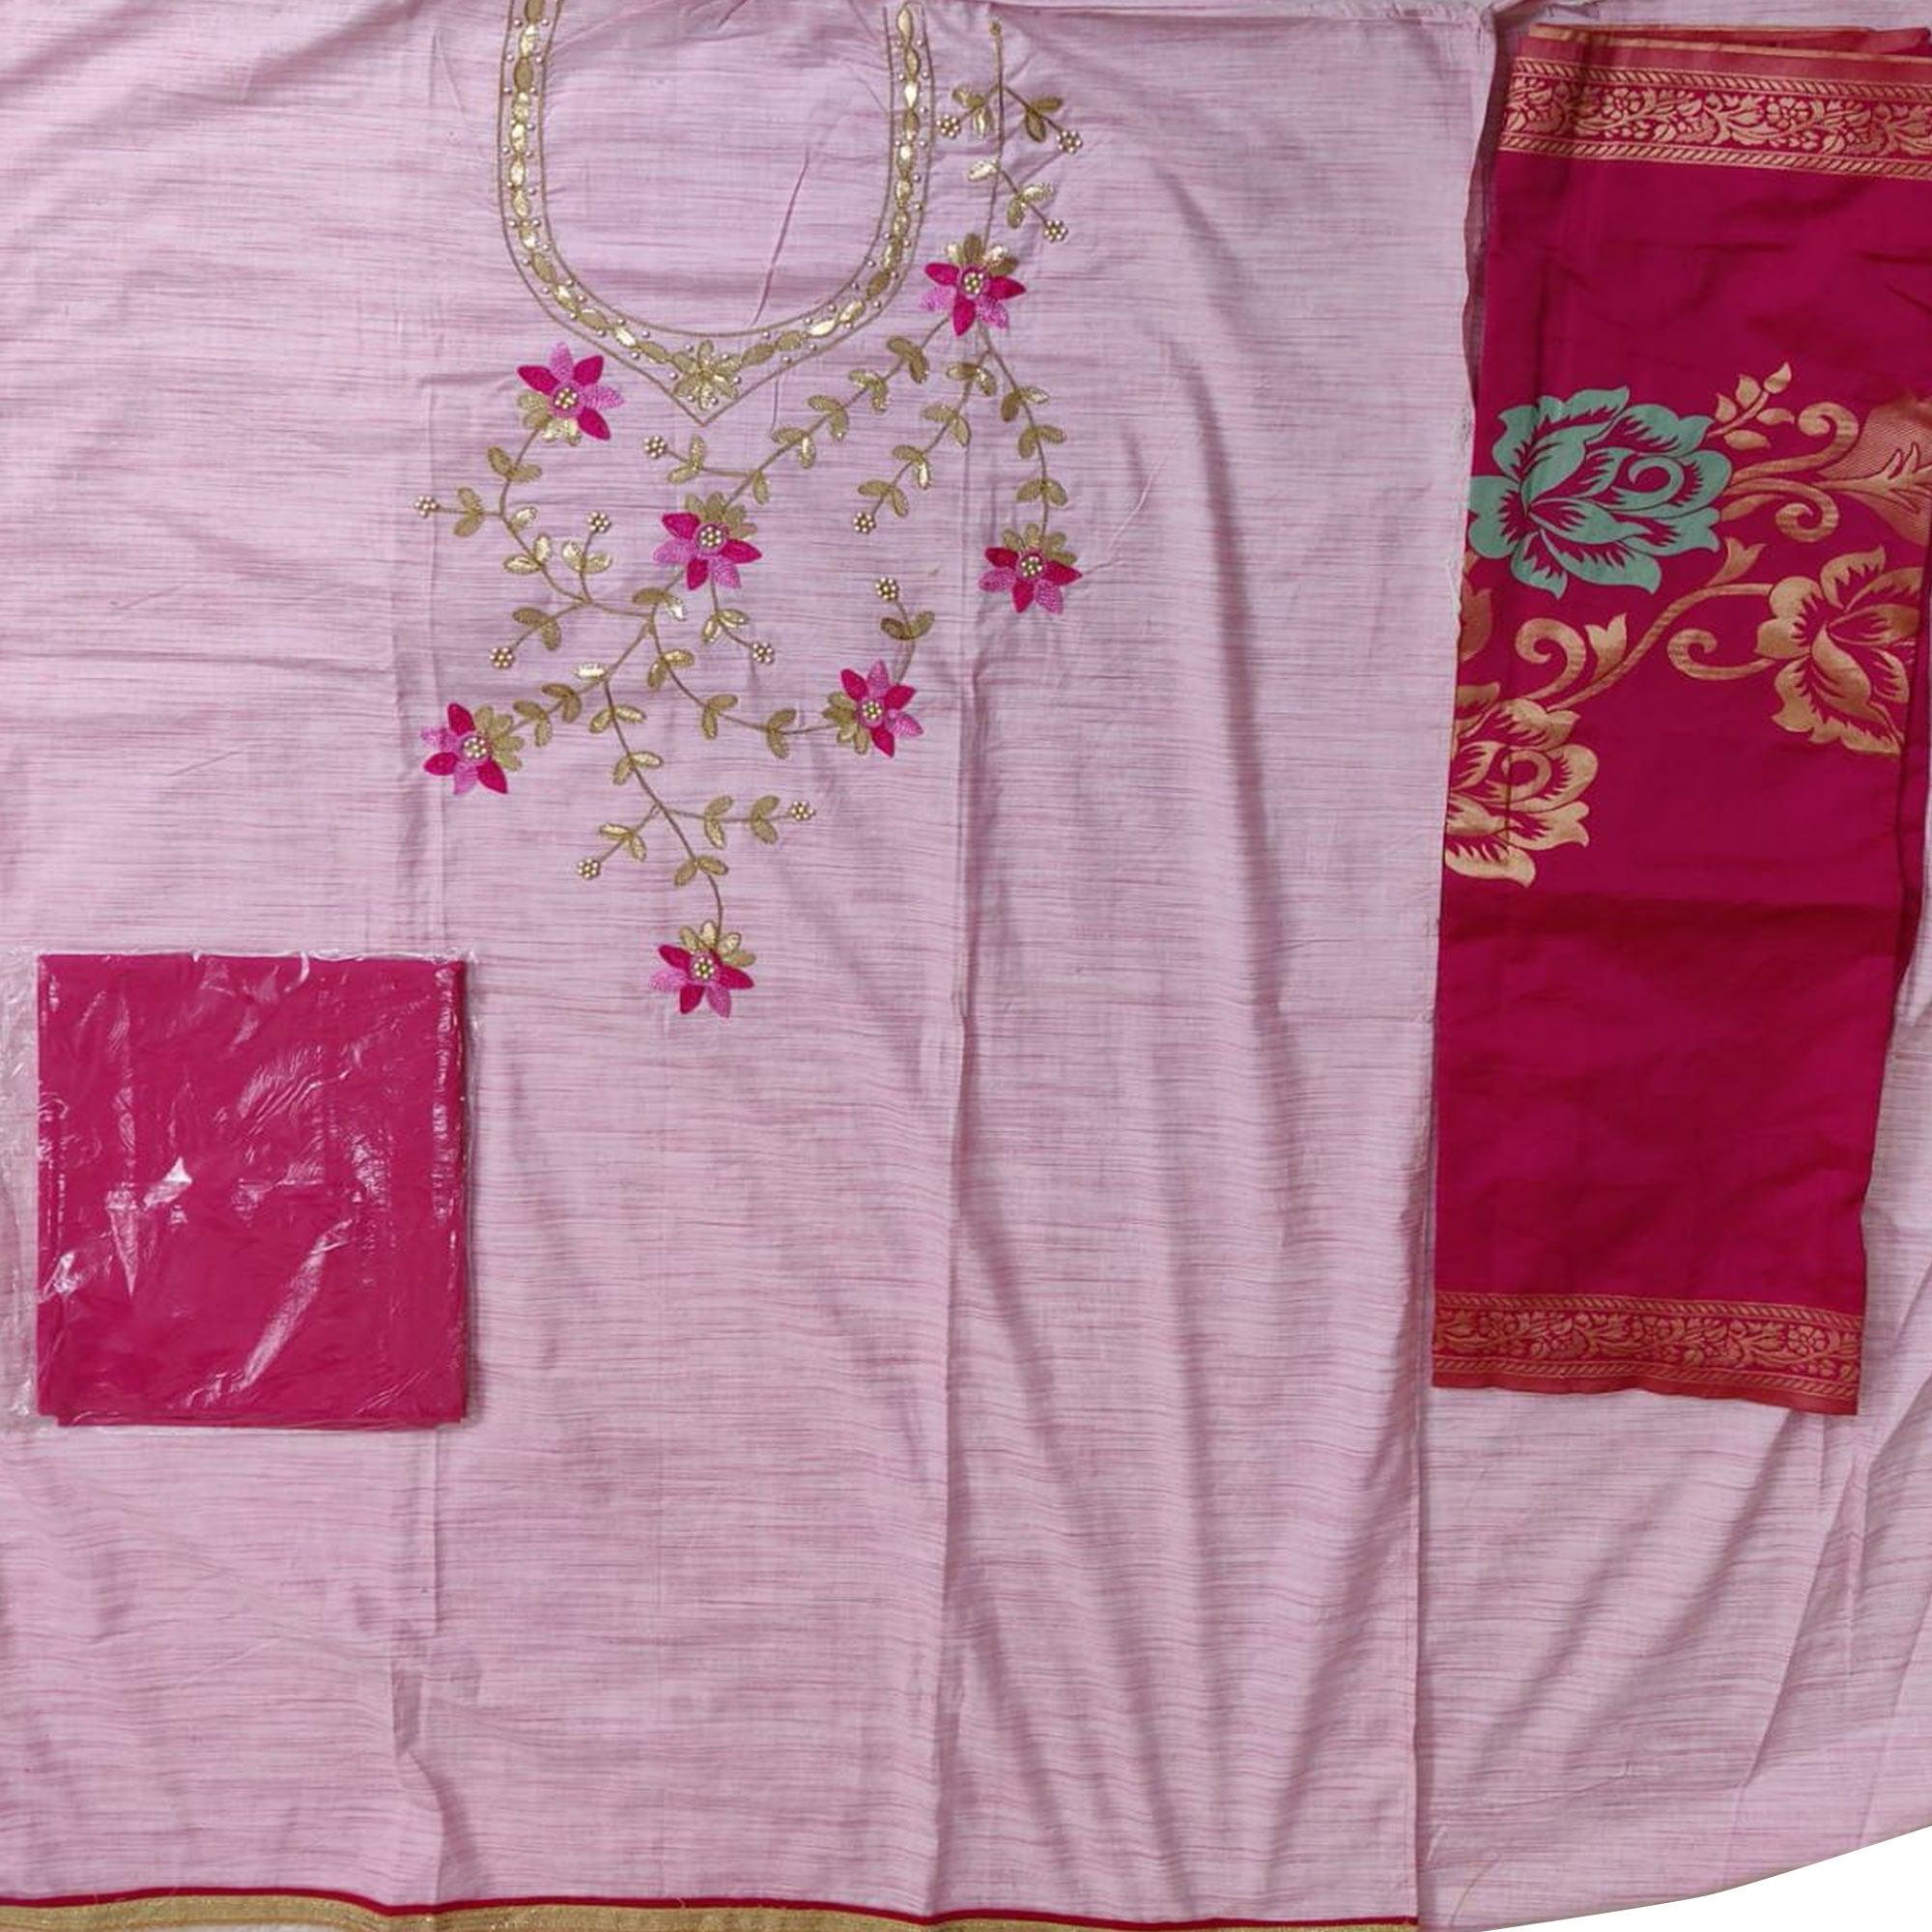 Attractive Light Pink Colored Festive Wear Embroidered Handloom Cotton Dress Material - Peachmode